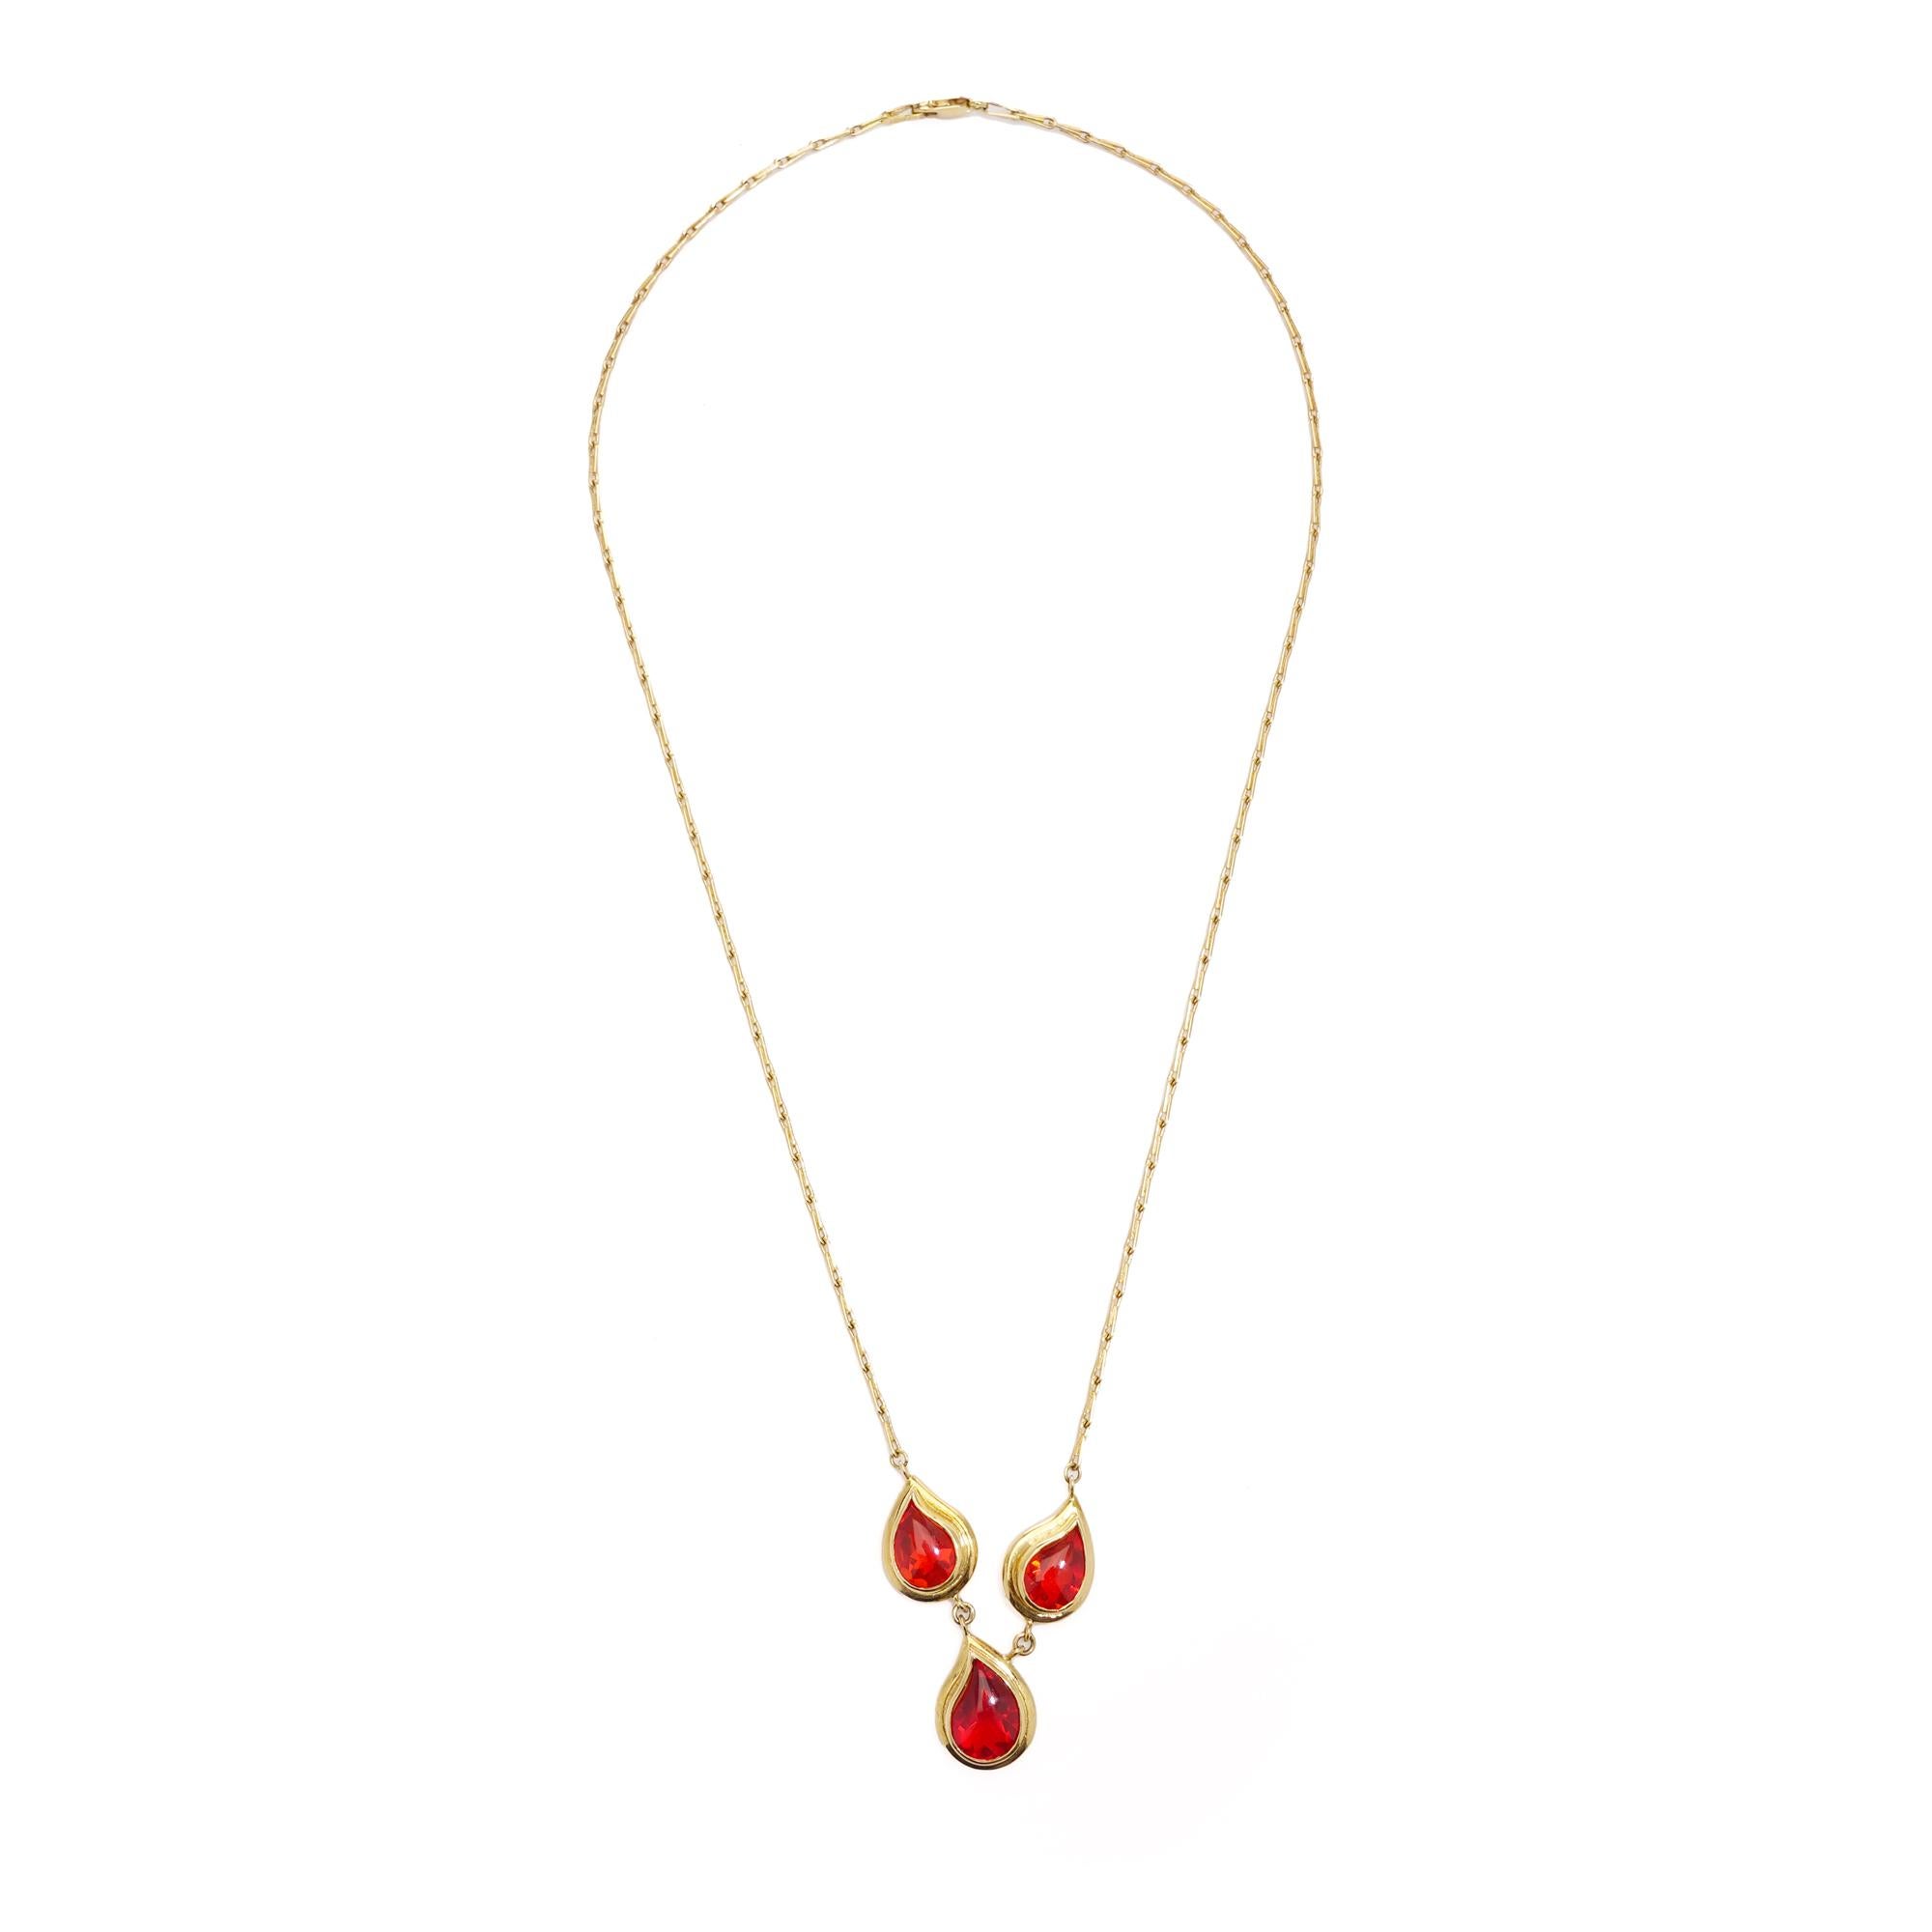 18kt gold pendant necklace featuring three tear-drop-shaped fire opals. 
Made in England.
Maker: W.J. L.s
Fully hallmarked.
Made after 2000s

Dimensions:
Necklace length: 46 cm
Weight: 13.00 grams

Fire Opals -
Shape: teardrop
Quantity of stones: